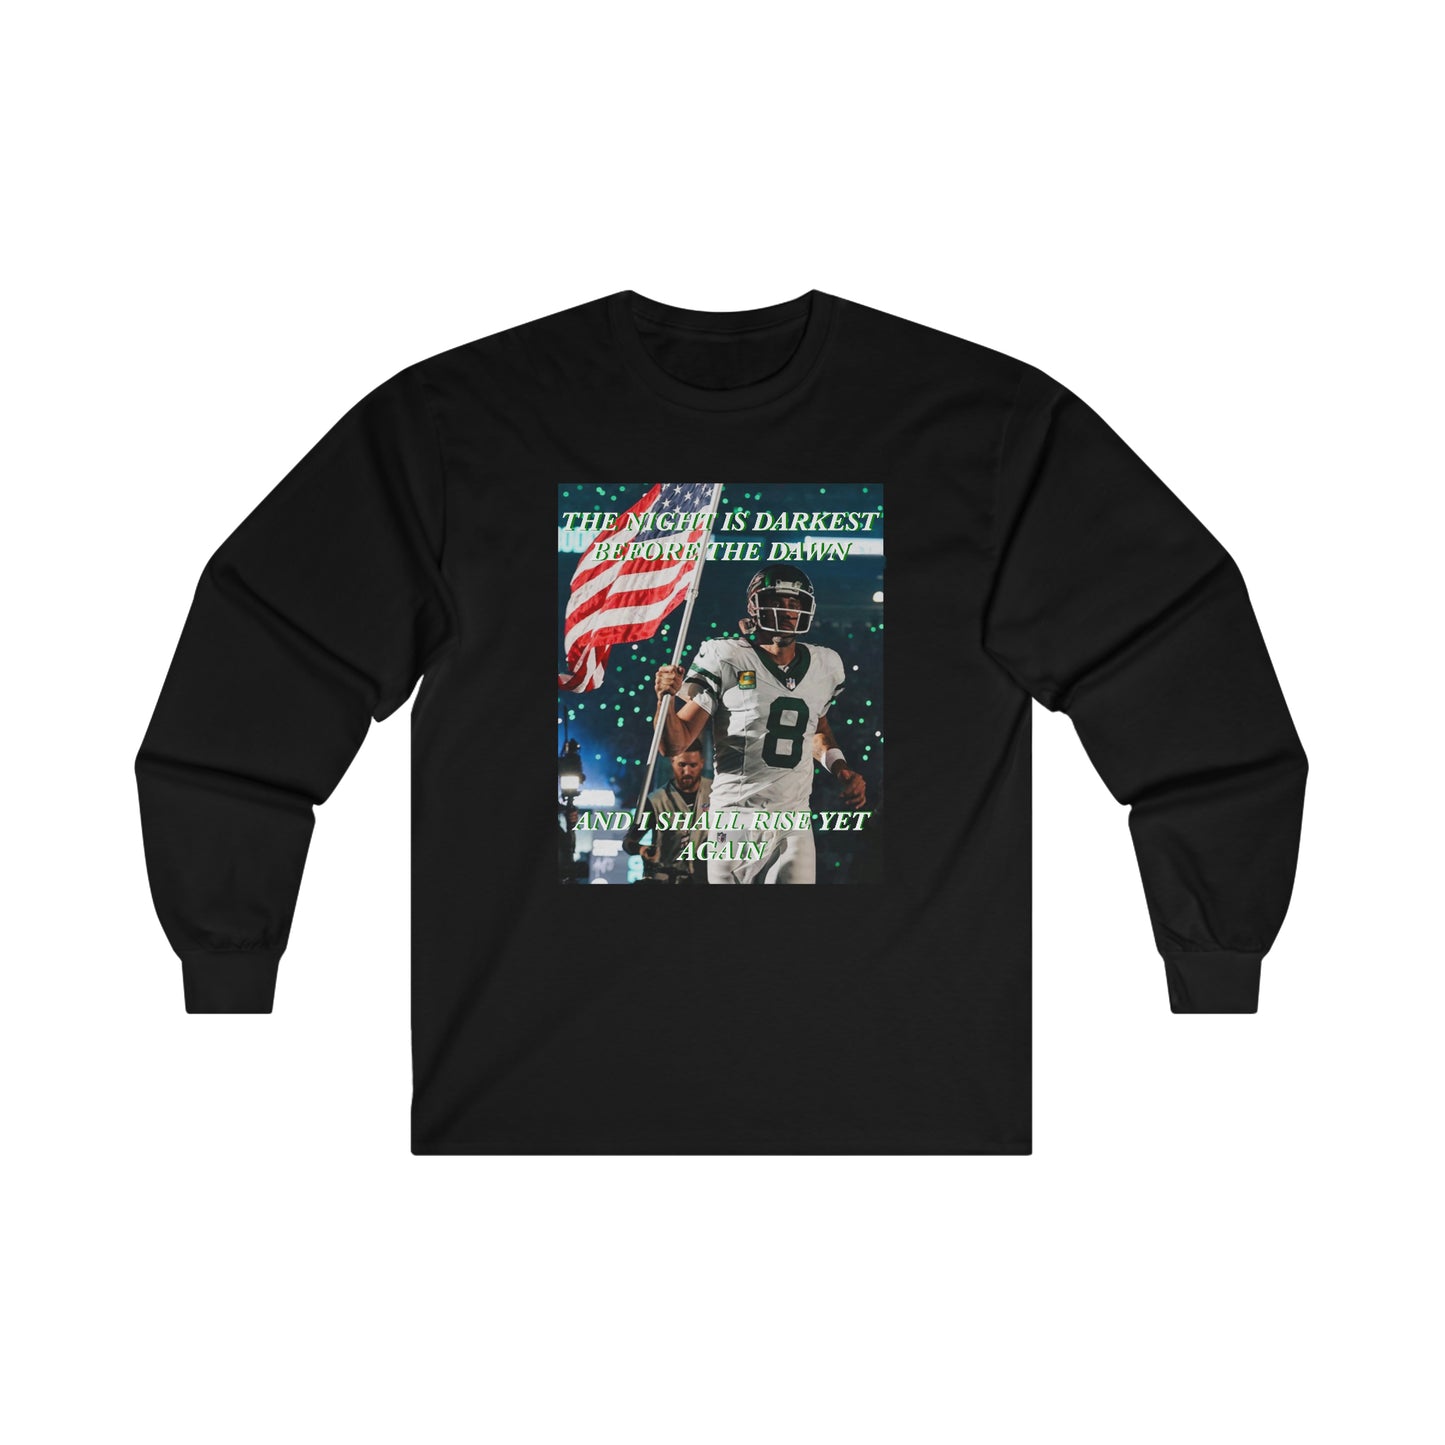 Aaron Rodgers The night is darkest before the dawn and I shall rise yet again Long Sleeve